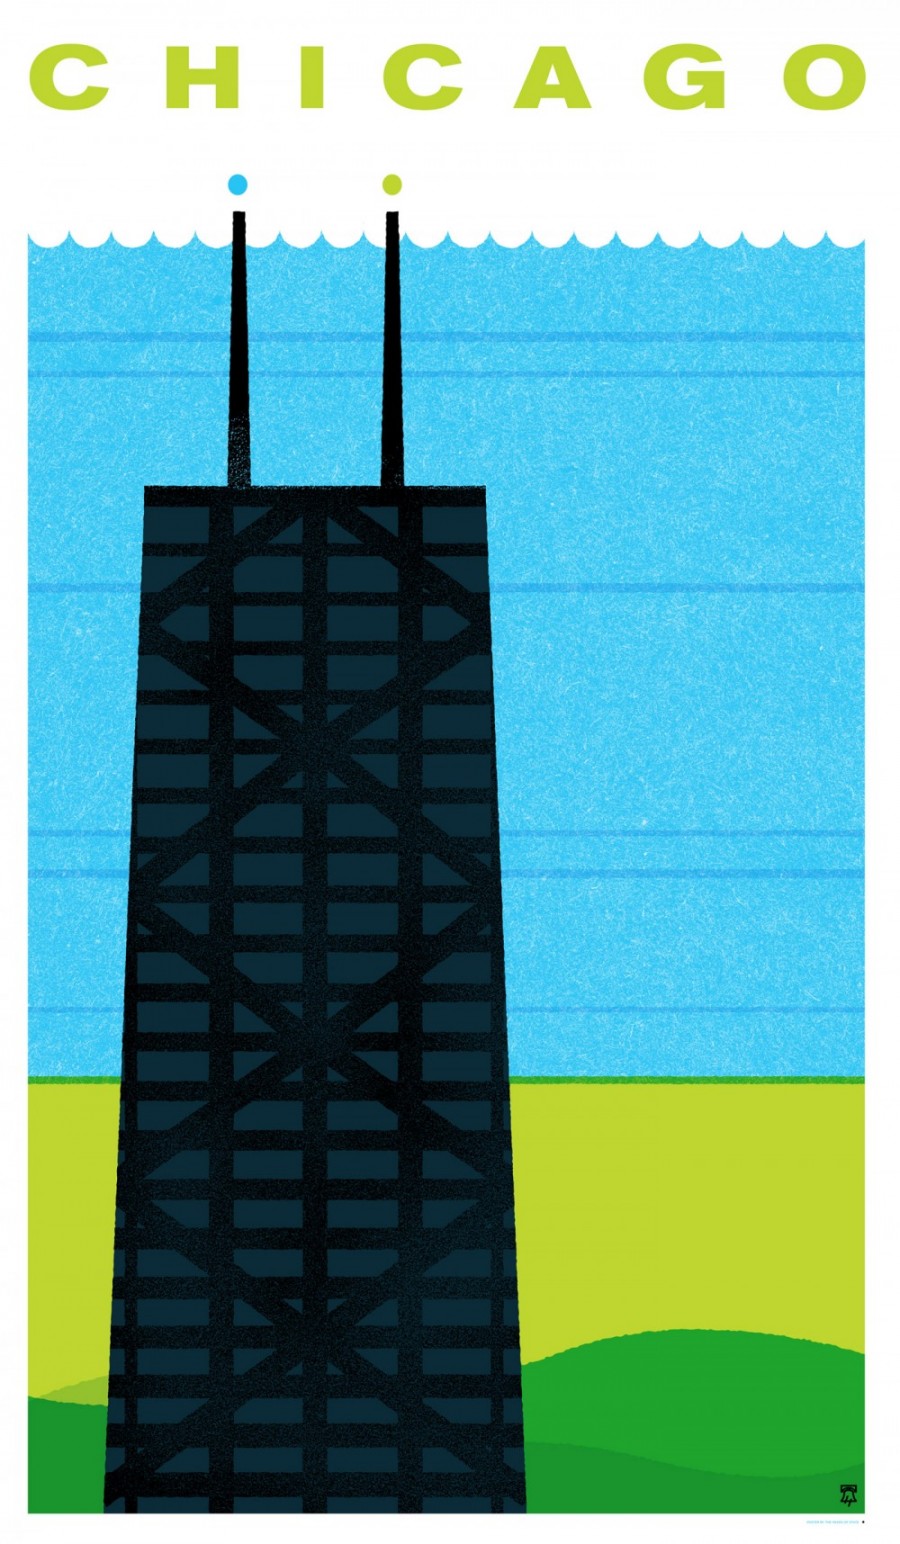 Chicago, Illinois - Travel Poster Series - The Heads of State